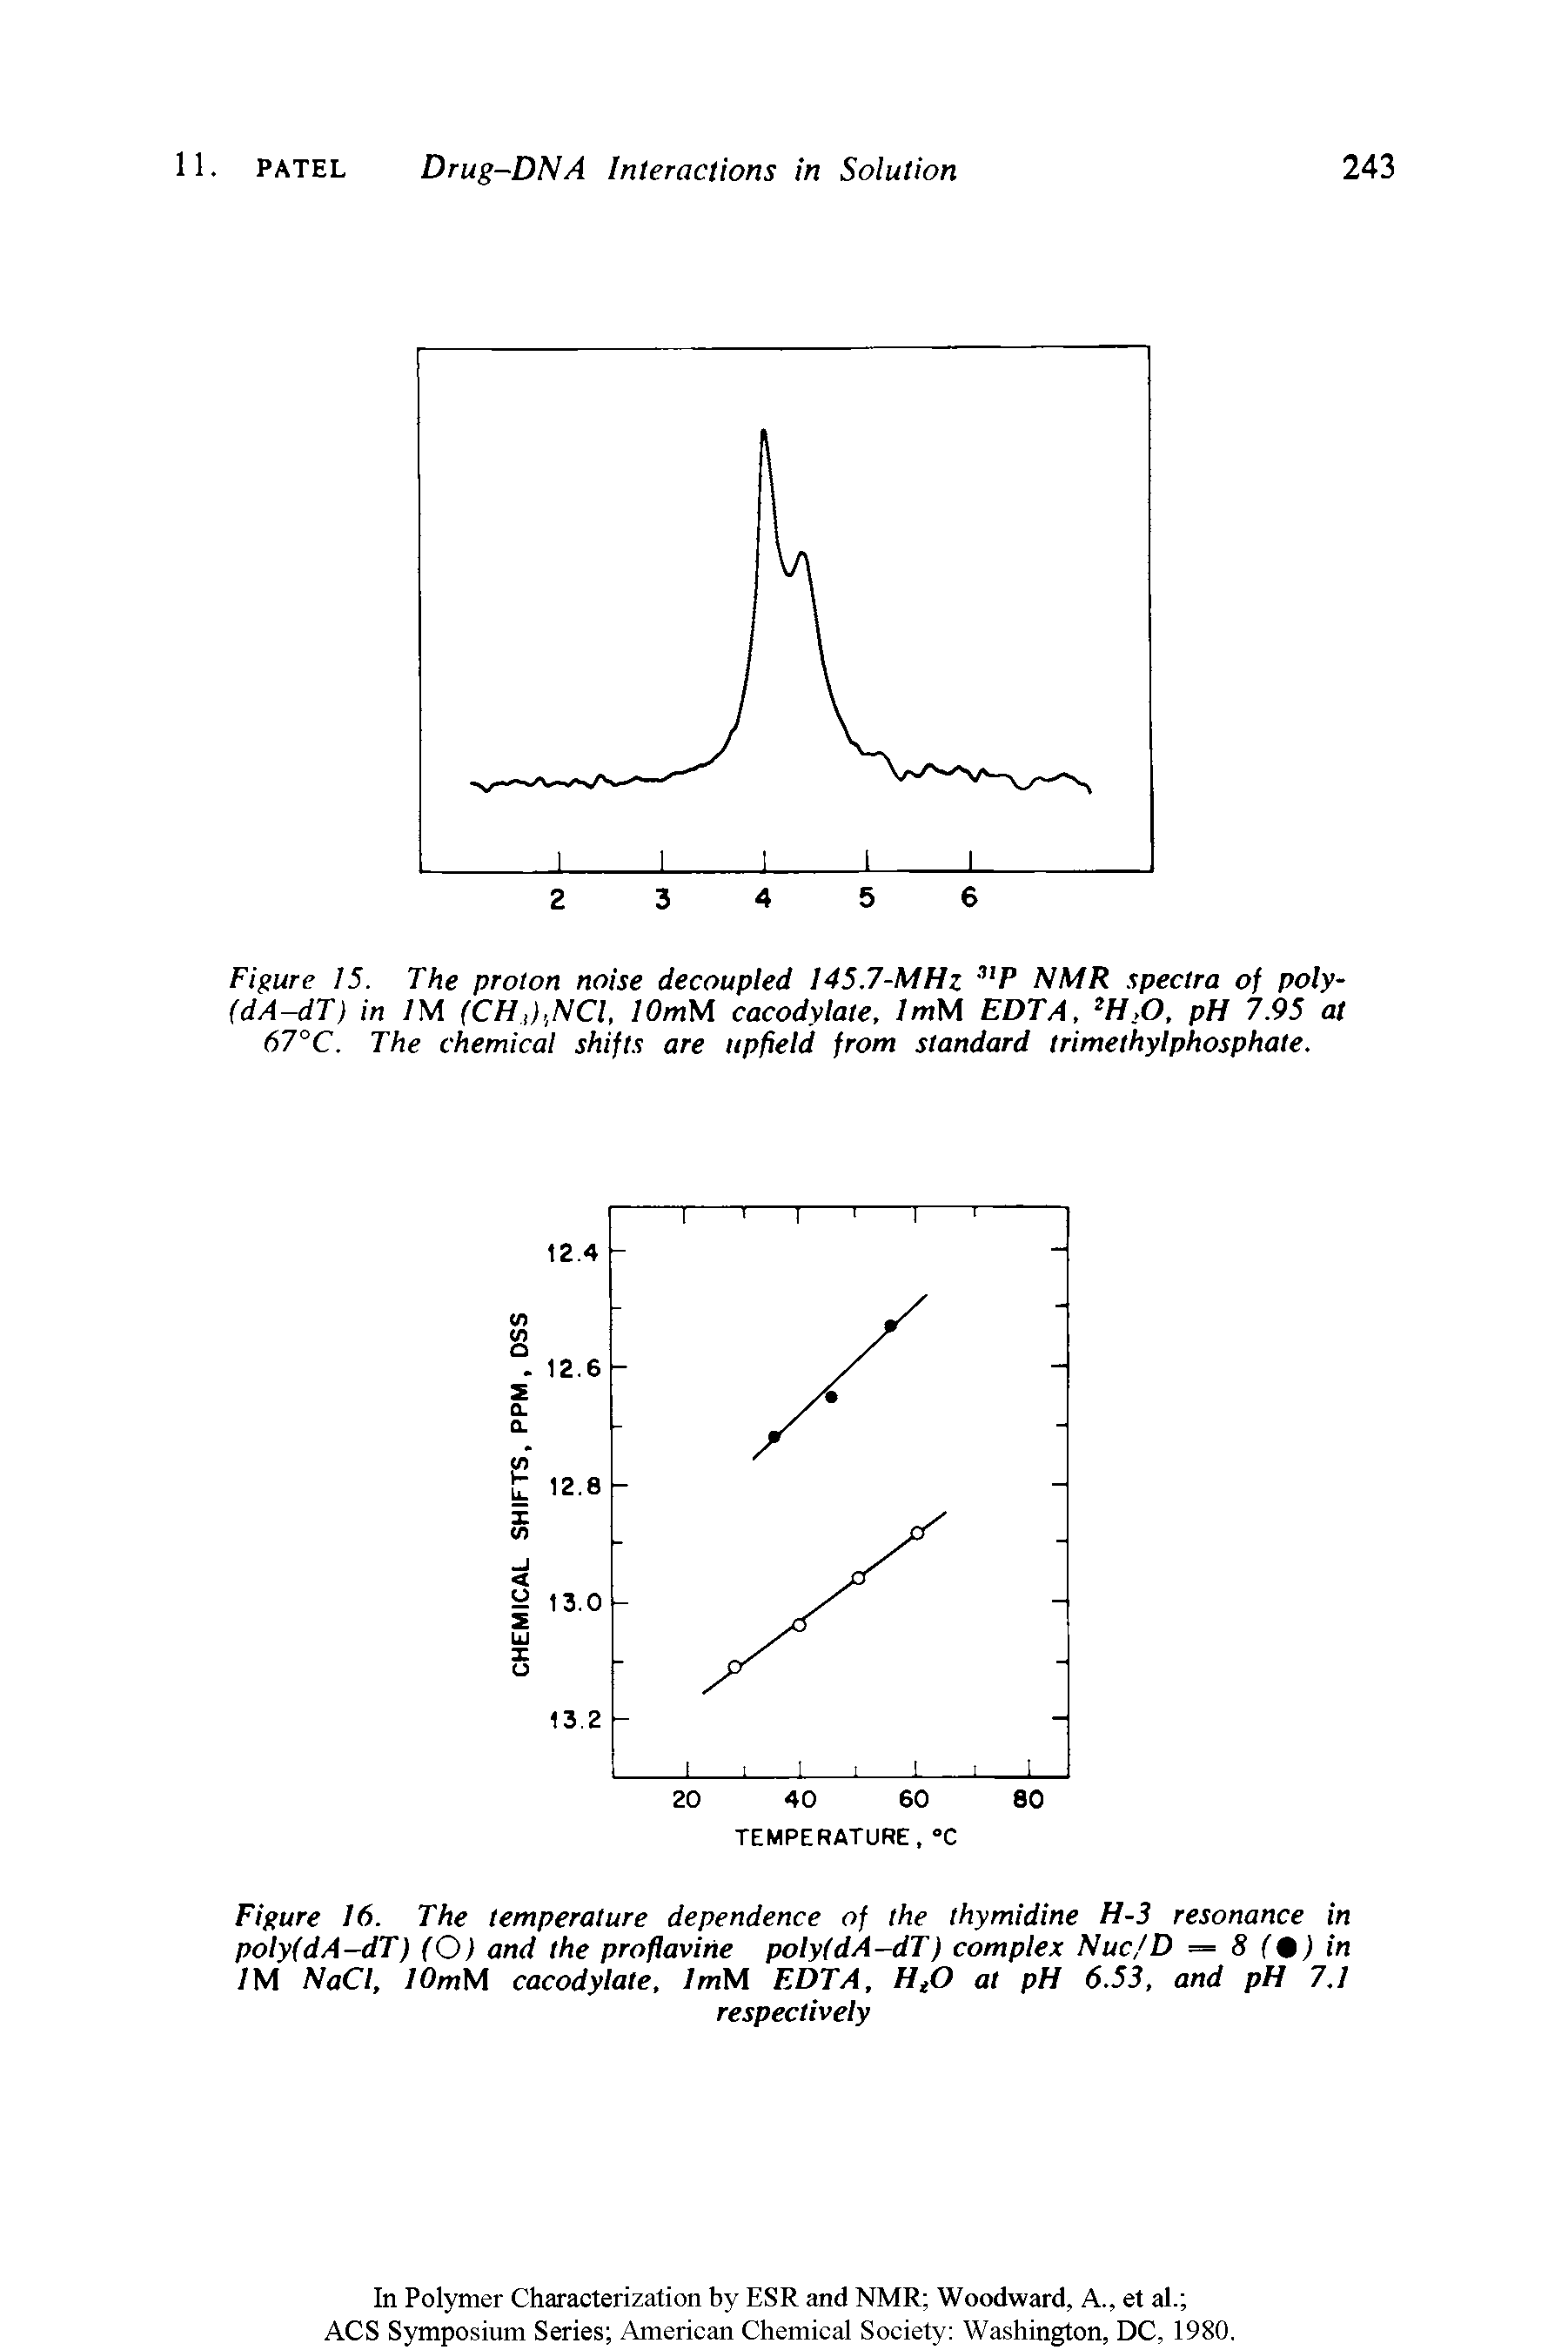 Figure 15. The proton noise decoupled 145.7-MHz 31P NMR spectra of poly-(dA-dT) in IM (CH,),NCl. lOmM cacodylate, ImM EDTA, 2H.O, pH 7.95 at 67°C. The chemical shifts are upfield from standard trimethylphosphate.